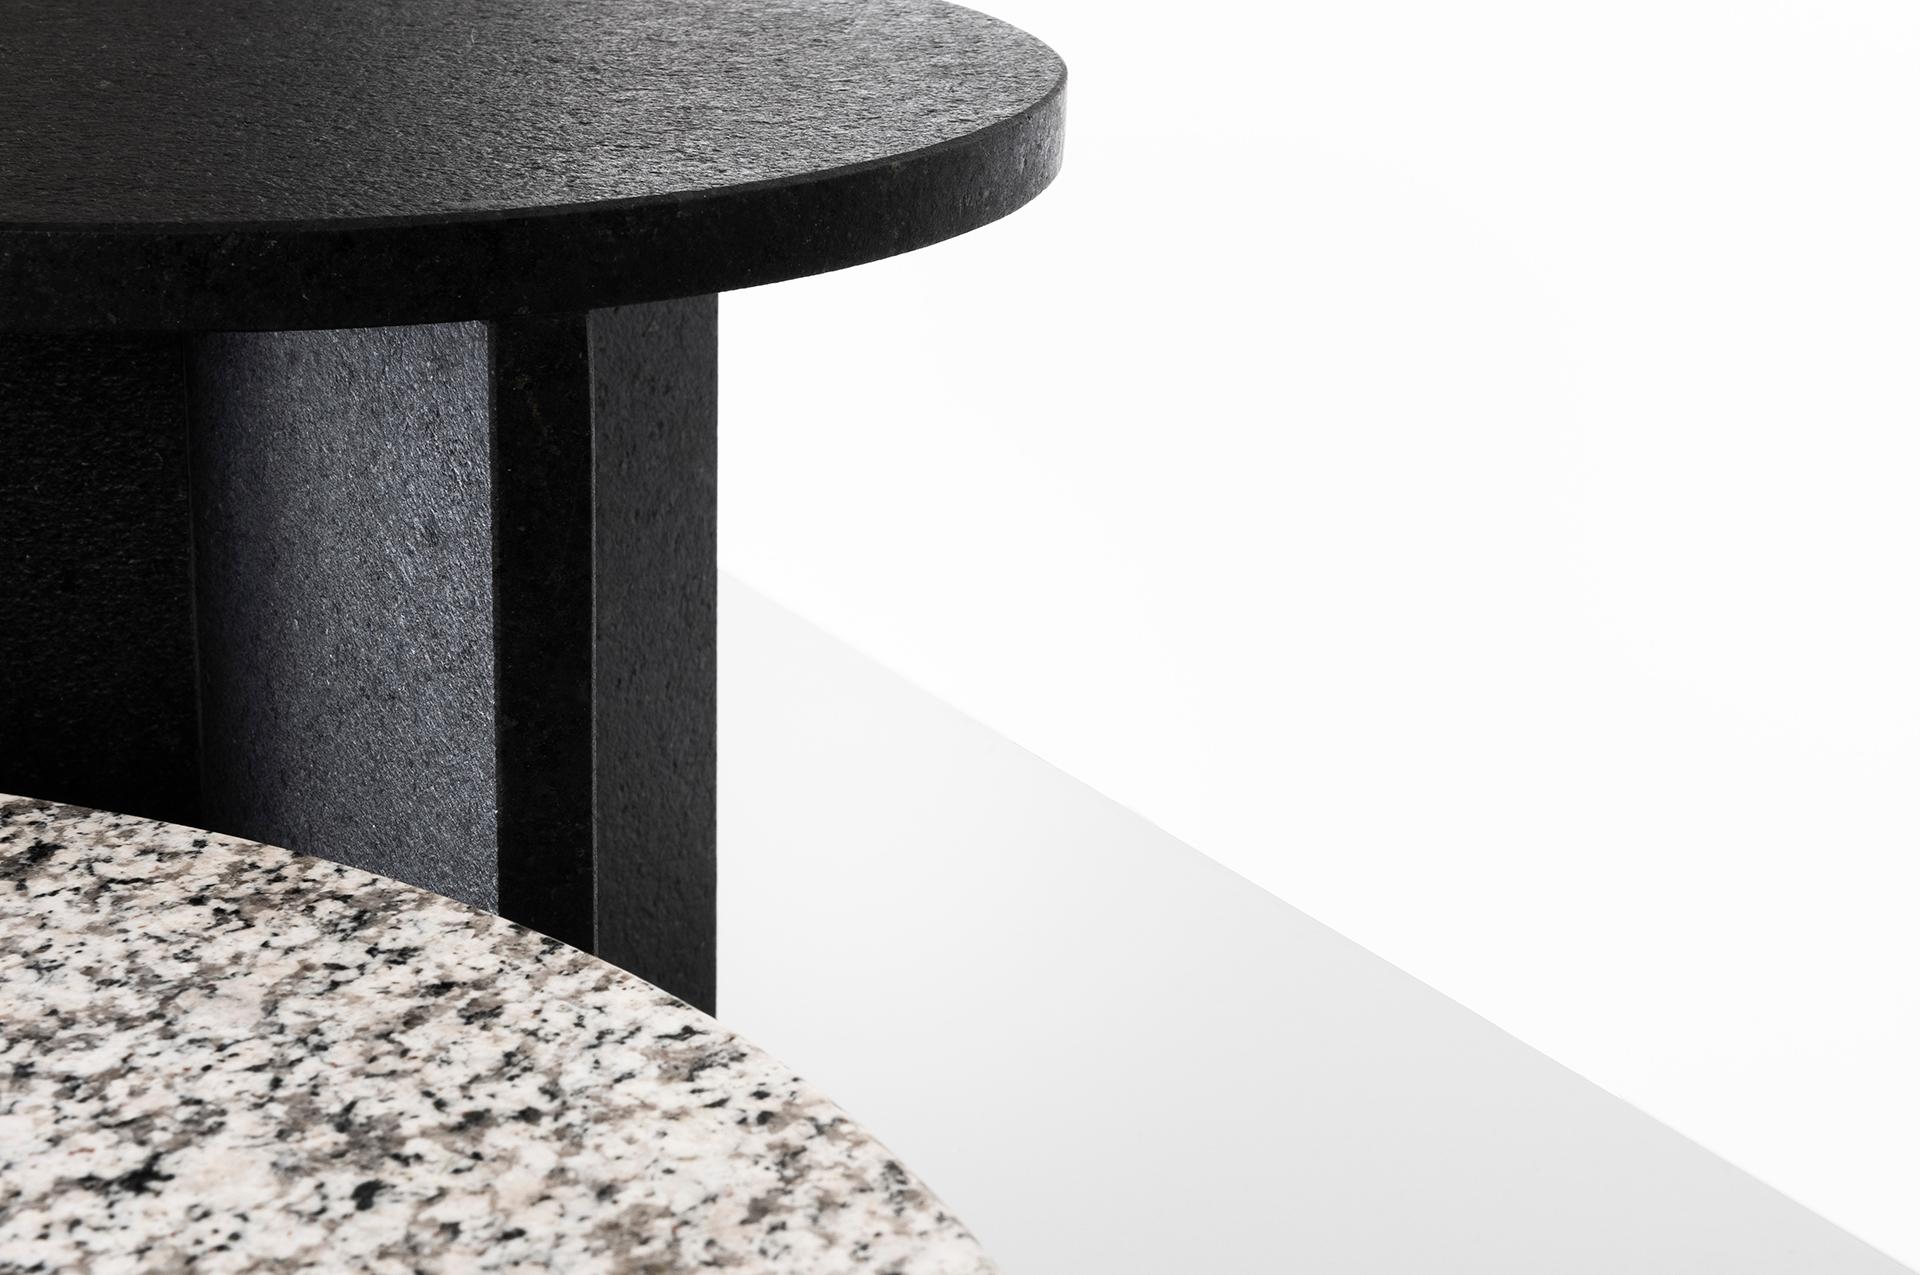 Leme Table, High, by RAIN, Contemporary Side Table, Brazilian Granite In New Condition For Sale In Sao Paulo, SP